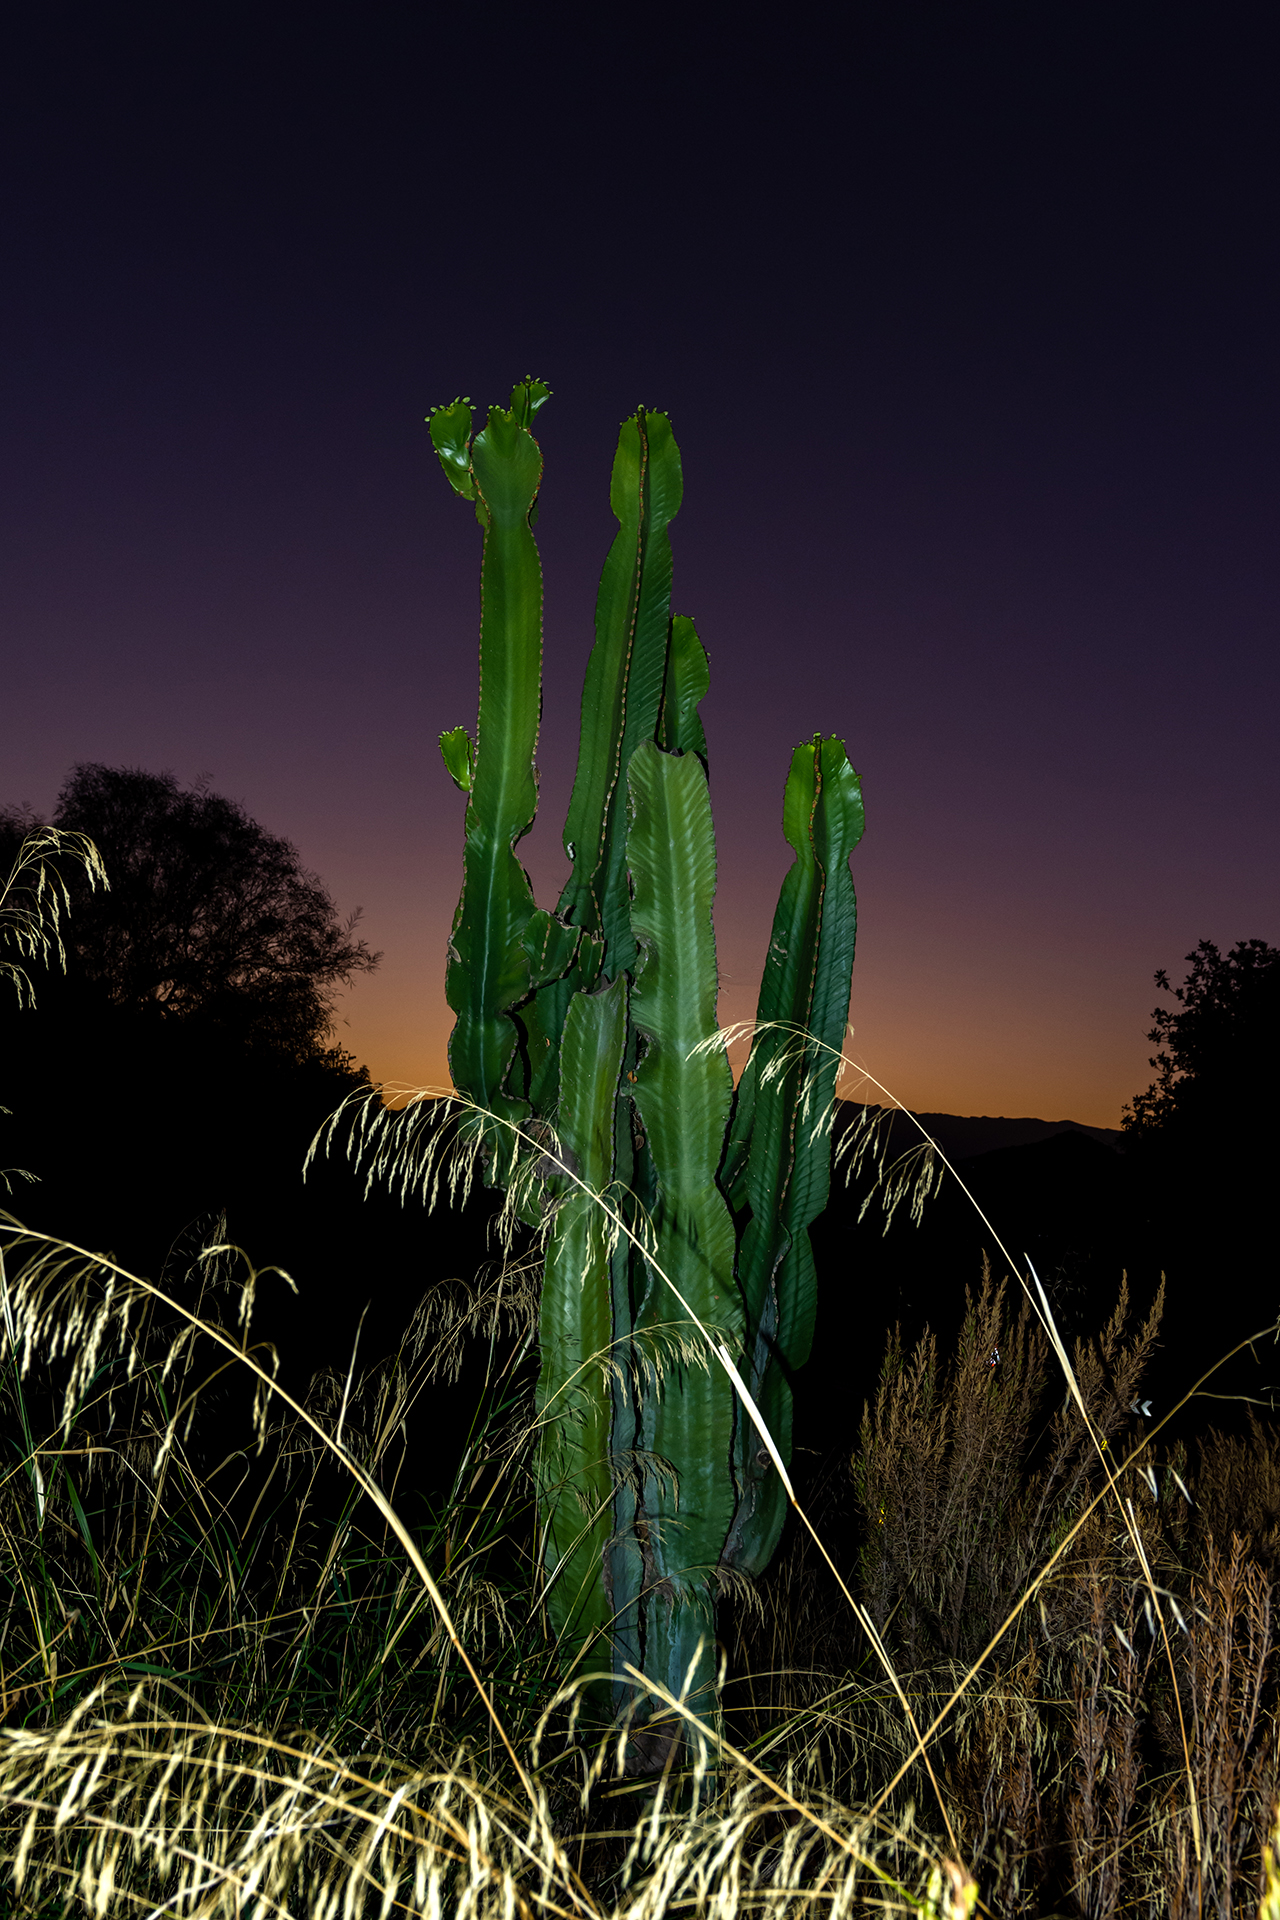 A magestic cactus set against a beautiful sunset backdrop